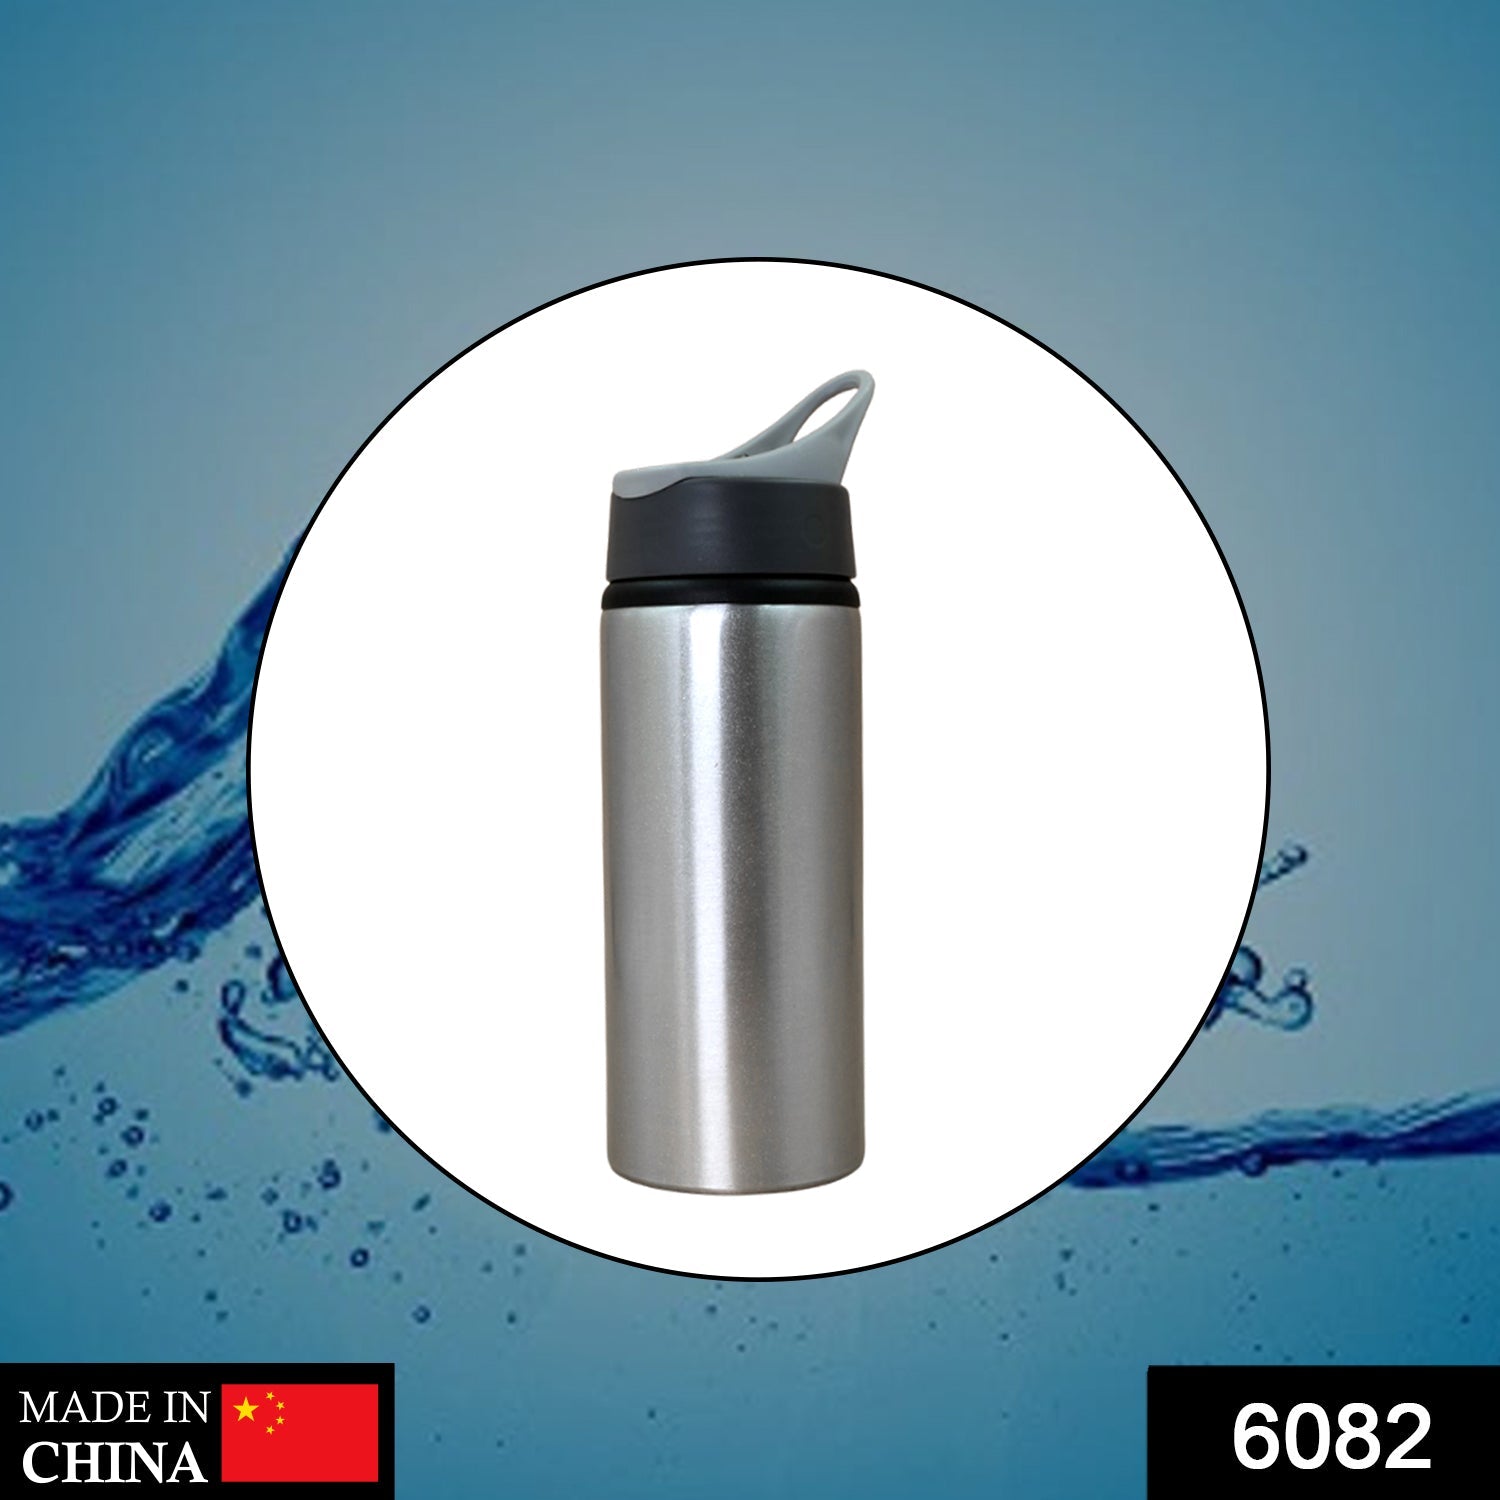 6082 CNB Bottle 1 used in all kinds of places like household and official for storing and drinking water and some beverages etc.